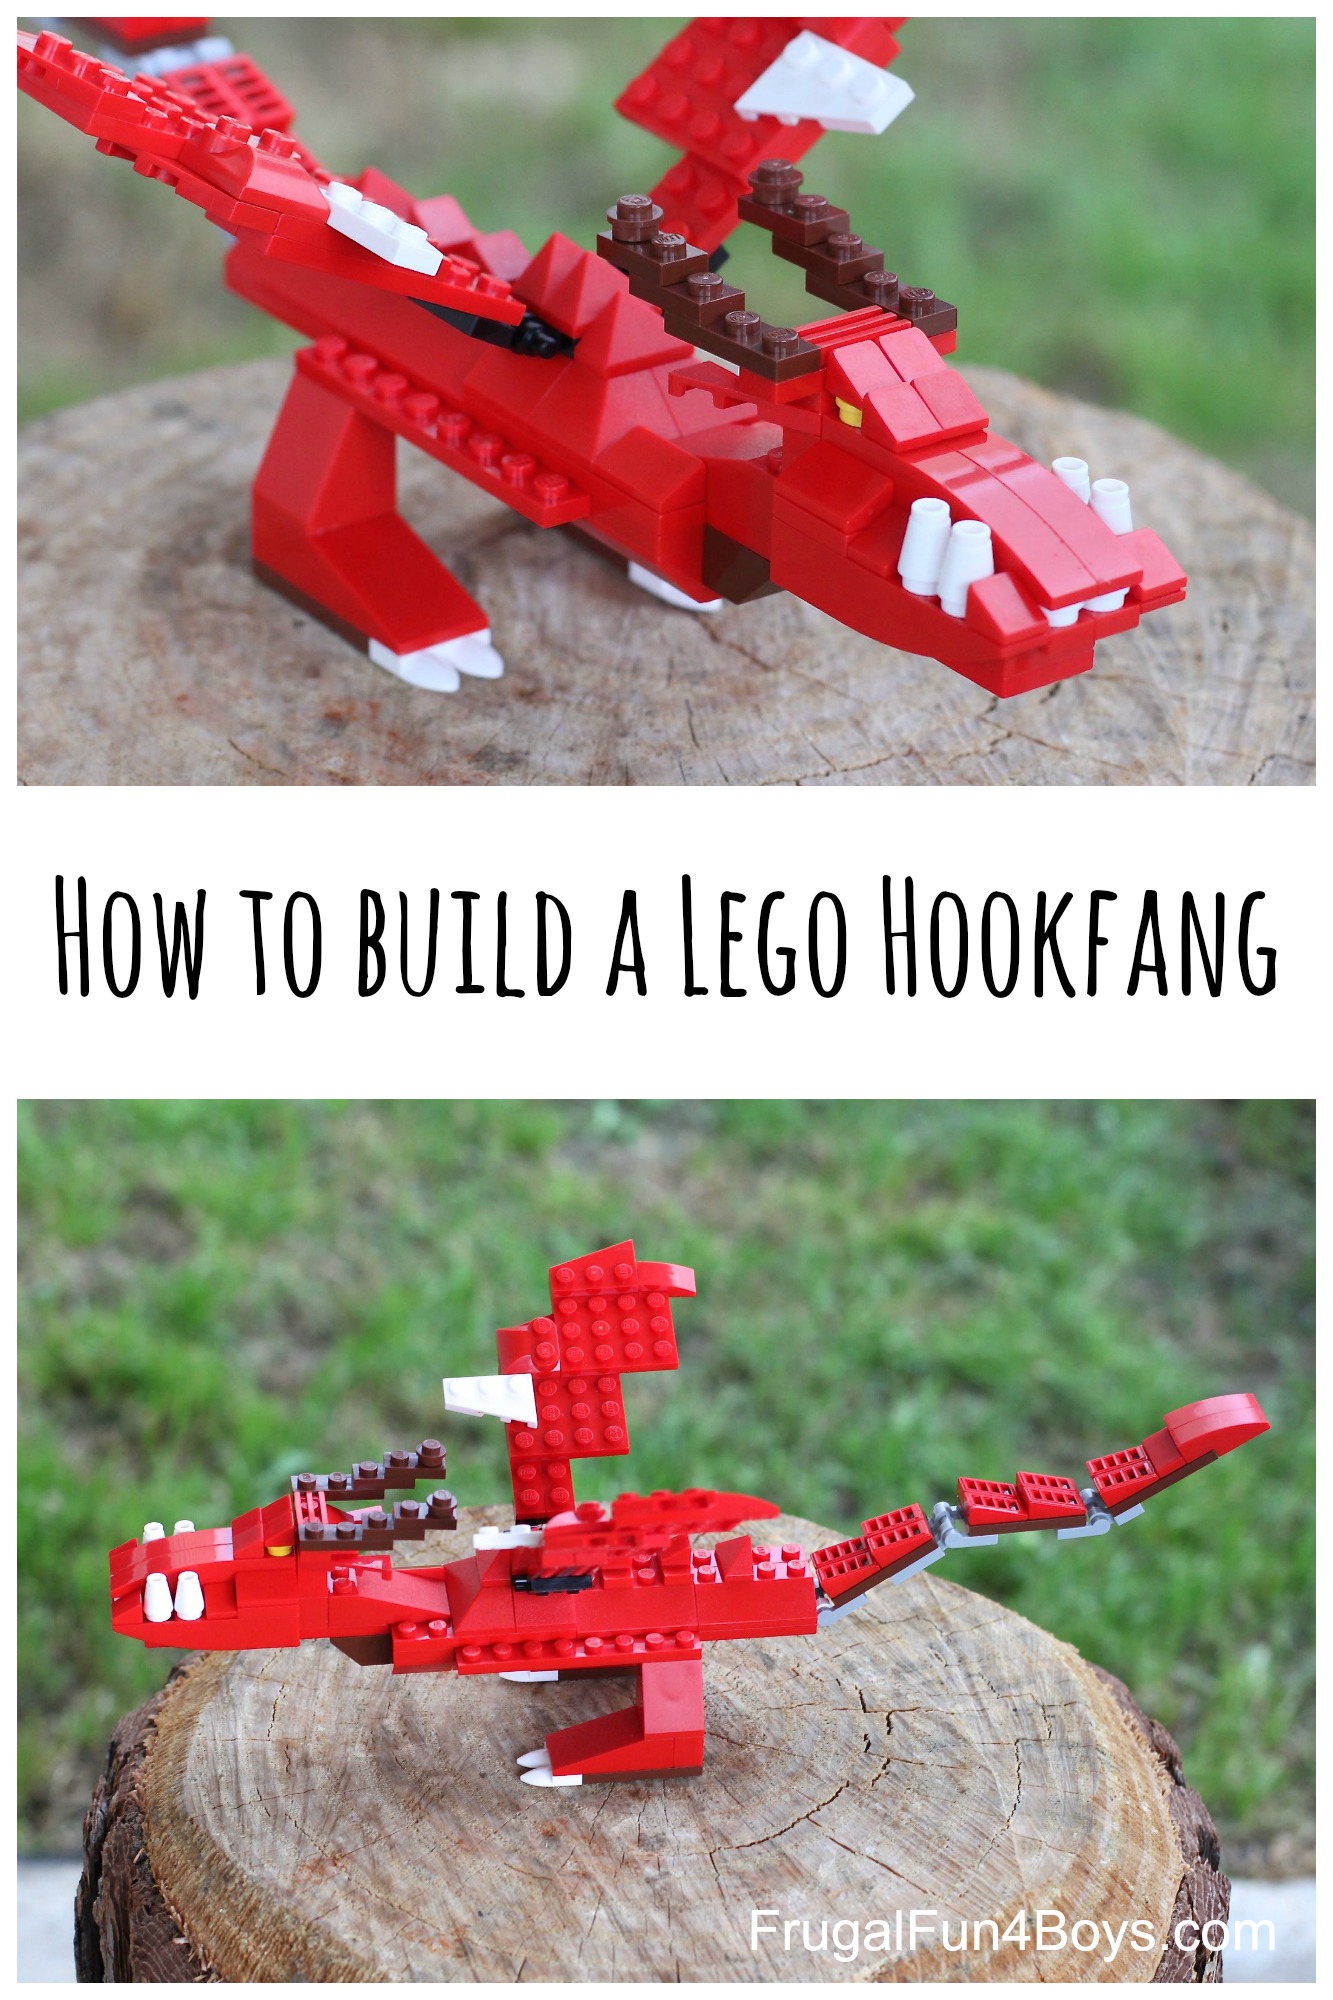 How to Build a LEGO Hookfang, inspired by How to Train Your Dragon